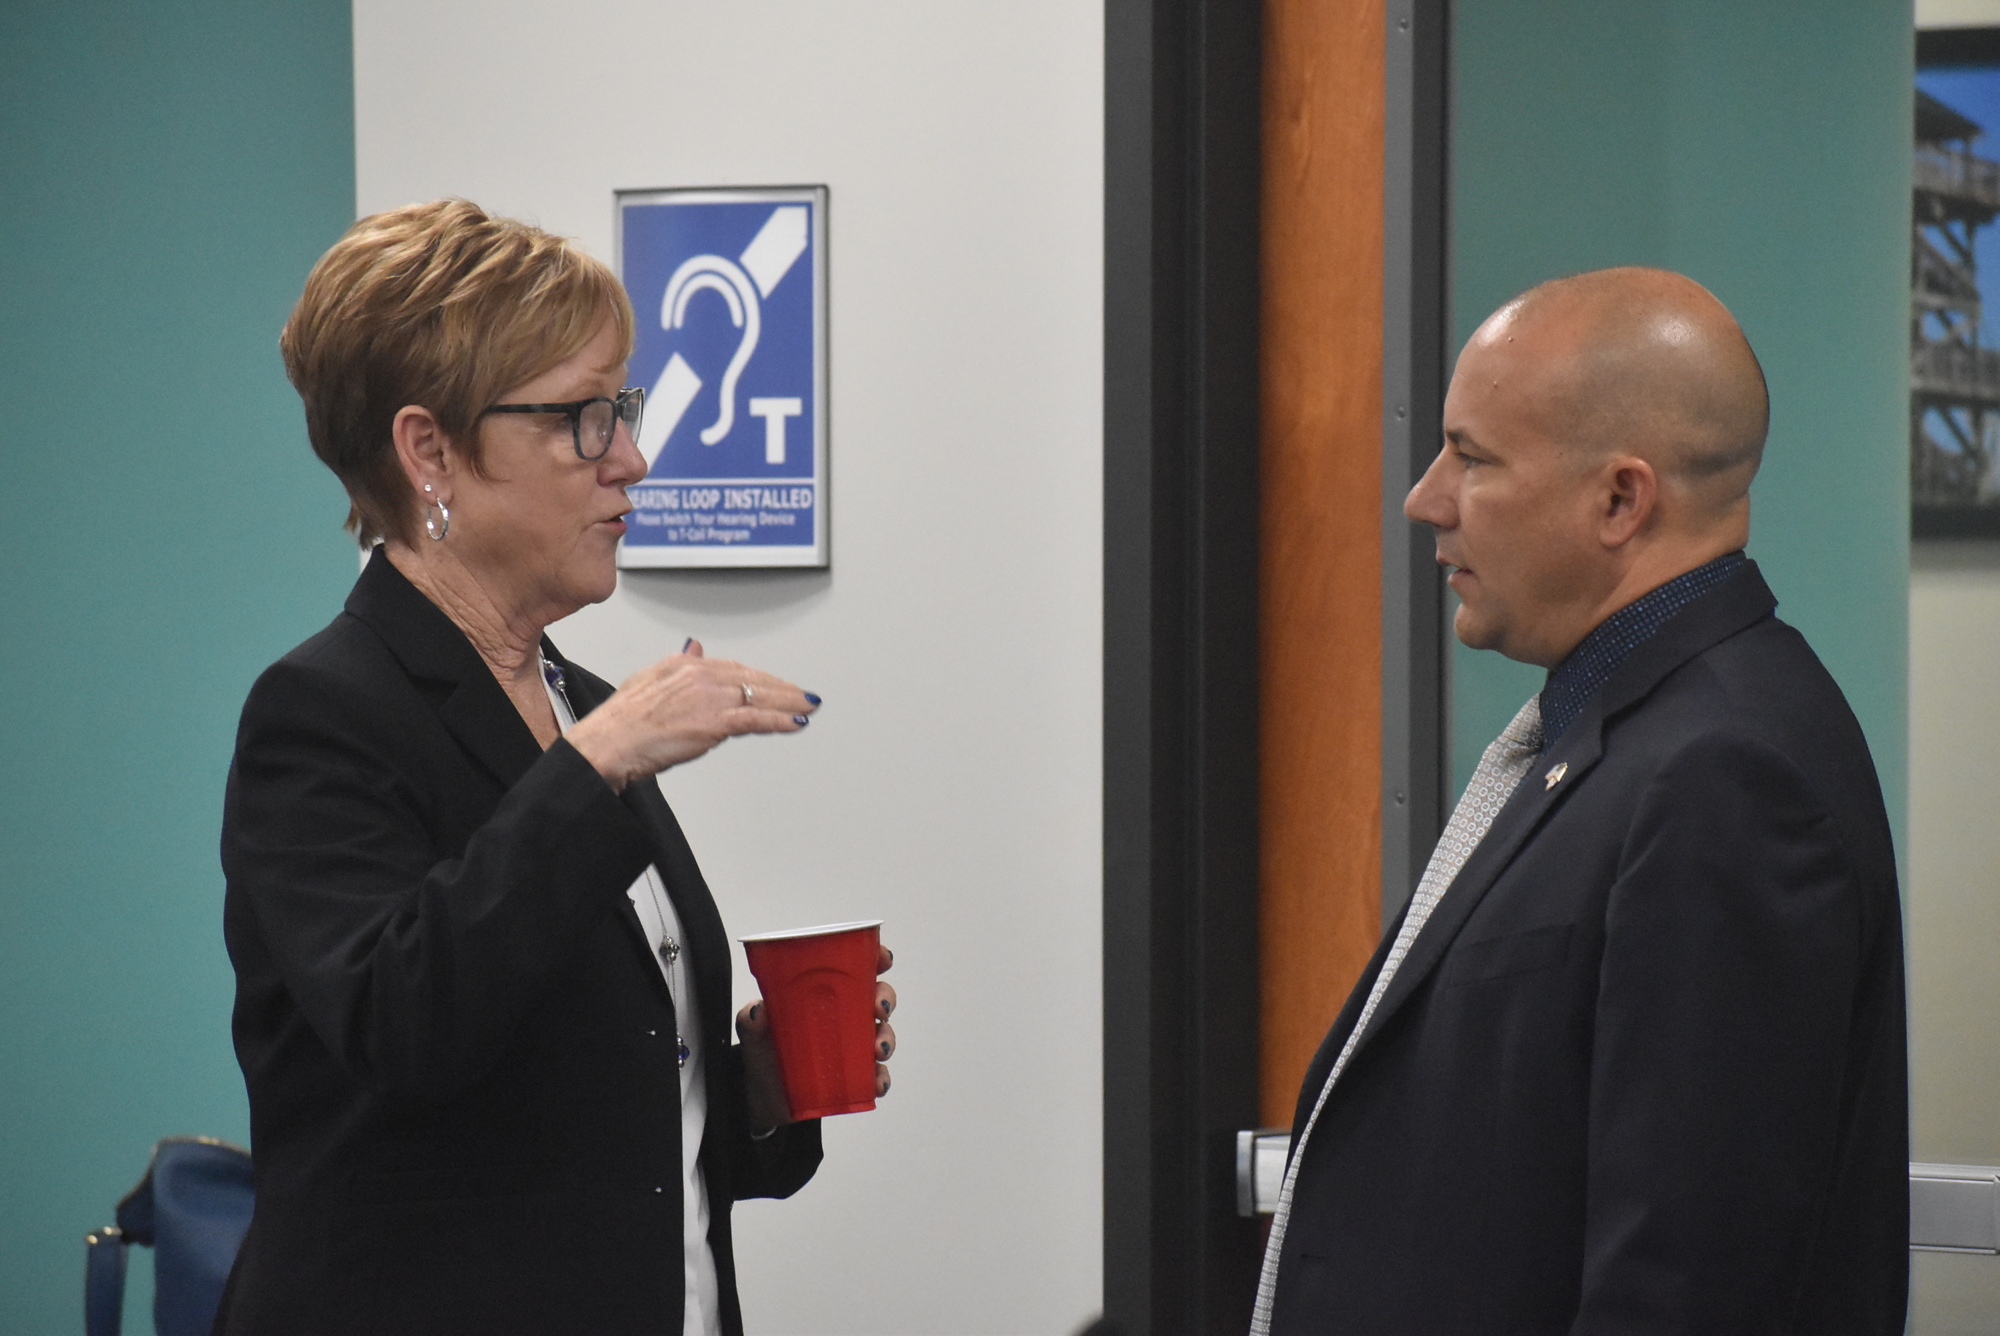 Deputy Administrator Karen Stewart talks with Manatee County Commissioner Kevin Van Ostenbridge, who advocated in favor of downsizing the future East County library to the cost originally budgeted three years ago.